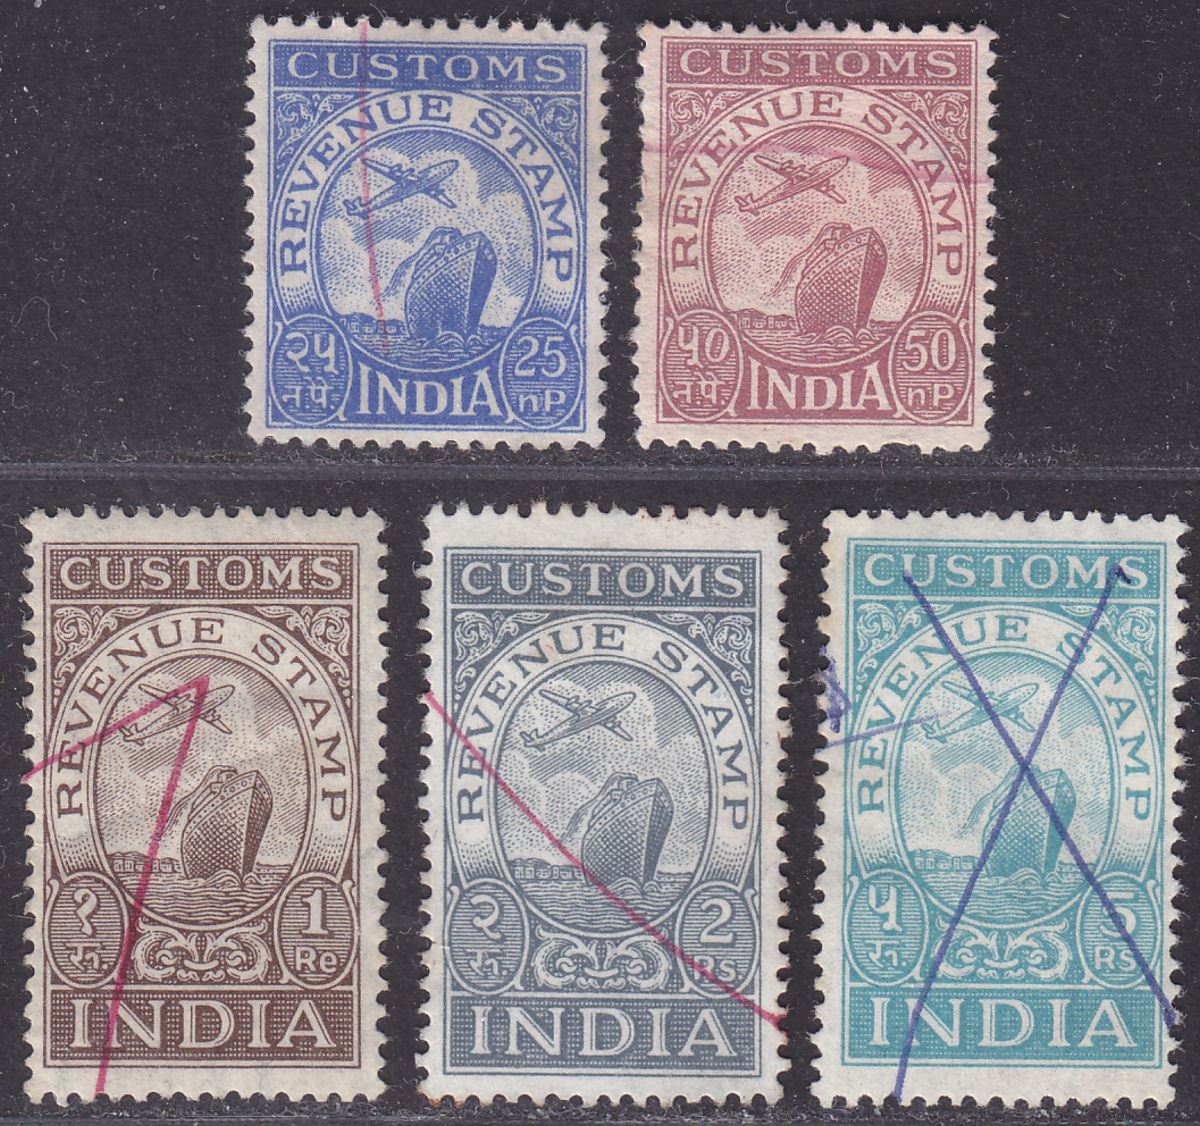 India 1957 Revenue Customs Part Set 25np to 5r Used BF5-BF9